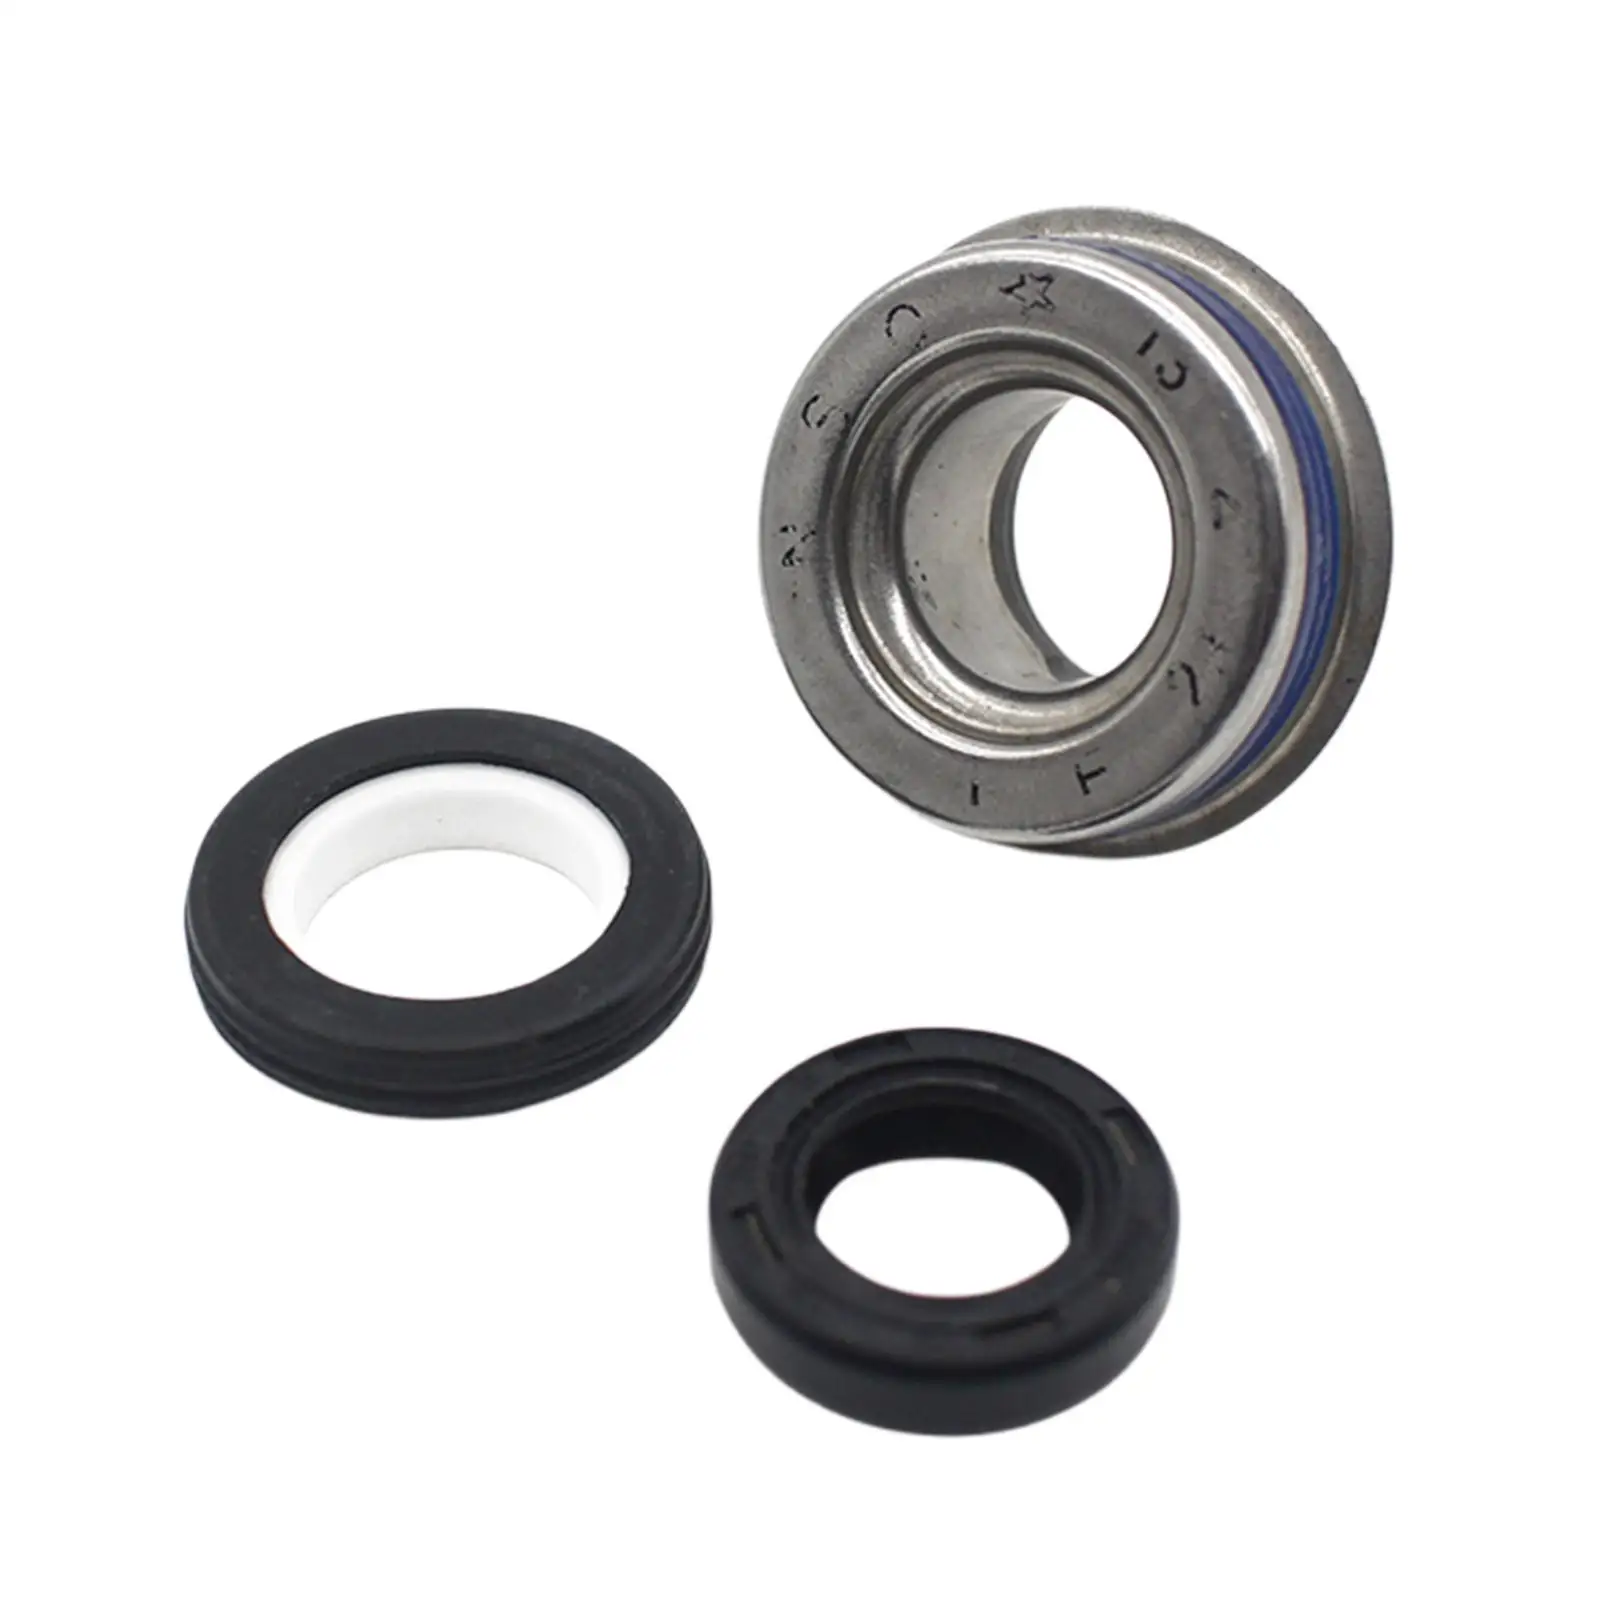 Motorbike Water Pump Oil Seals Fits for TM  XP500 Yy-Yl-Zs 2009-2010 Replaces Professional Durable Accessories